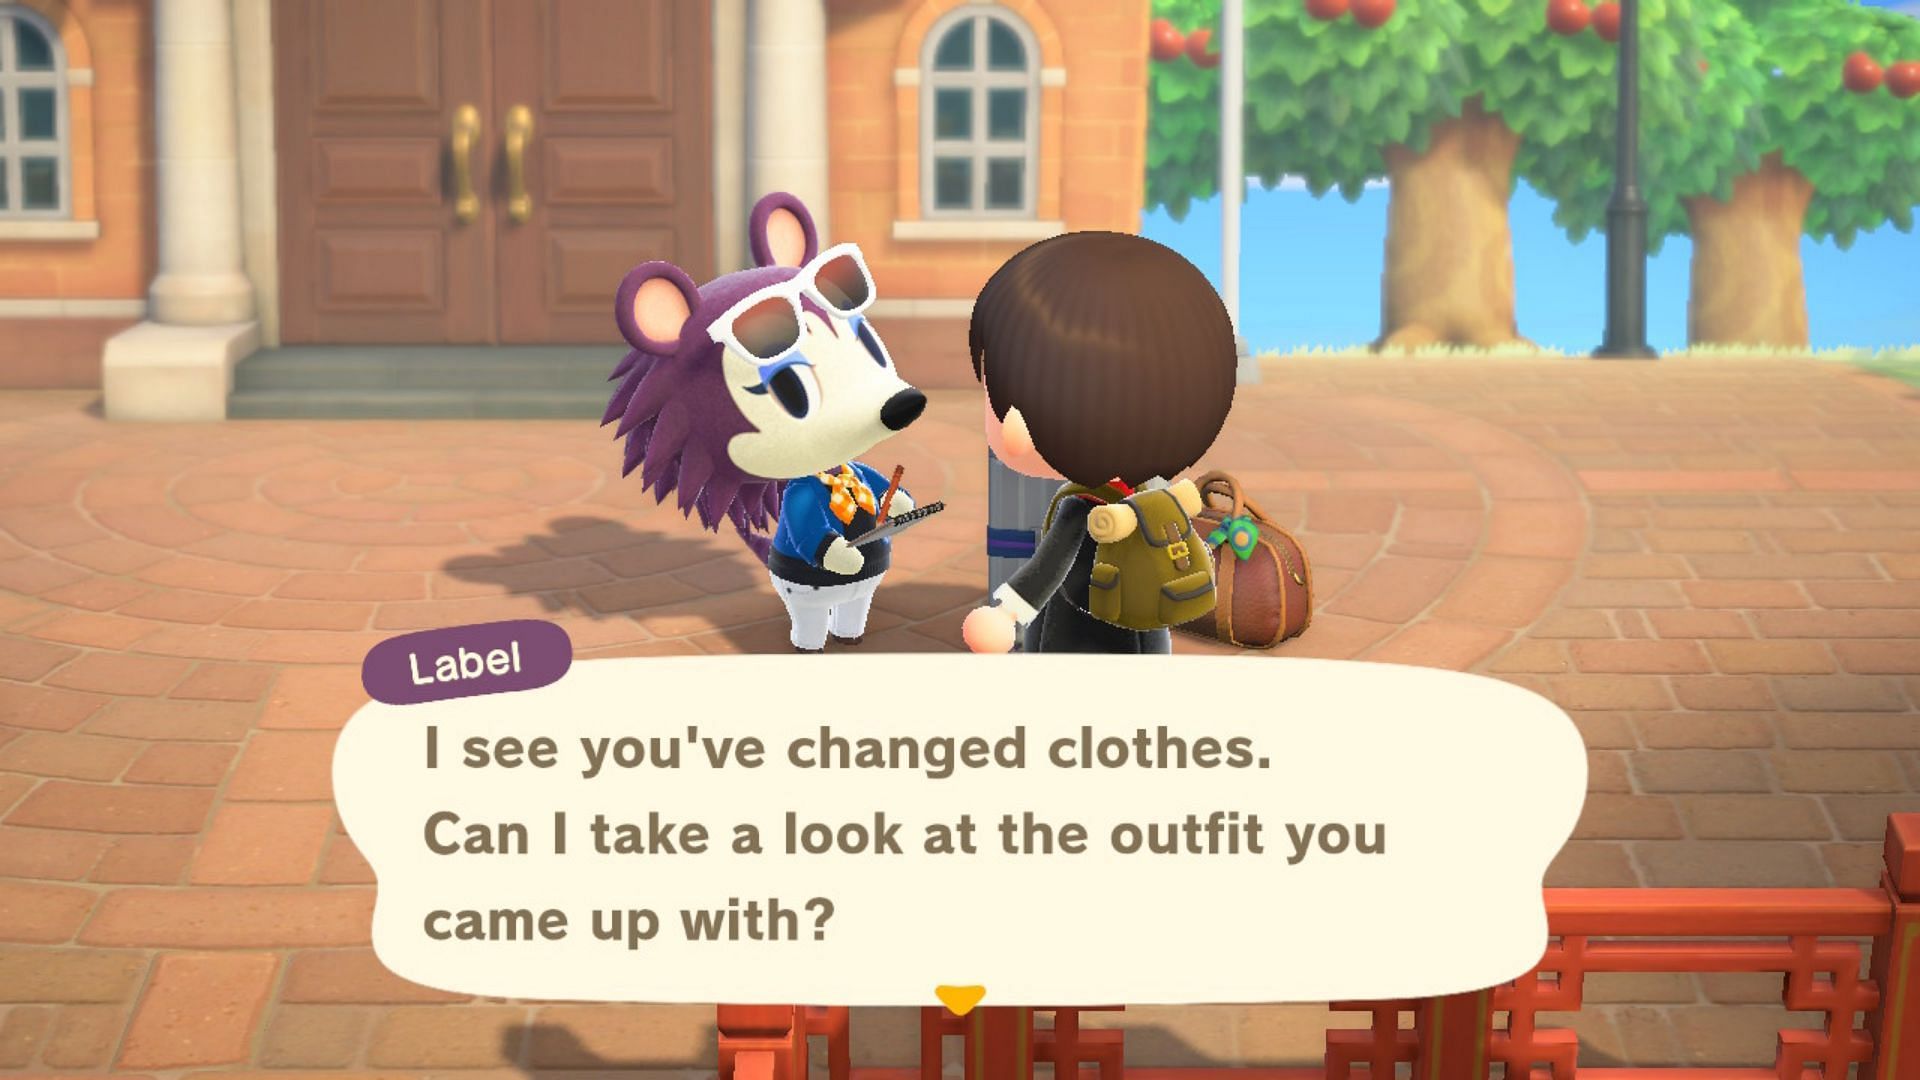 Tailors tickets come as part of Label&#039;s rewards in Animal Crossing: New Horizons (Image via Nintendo Insider)